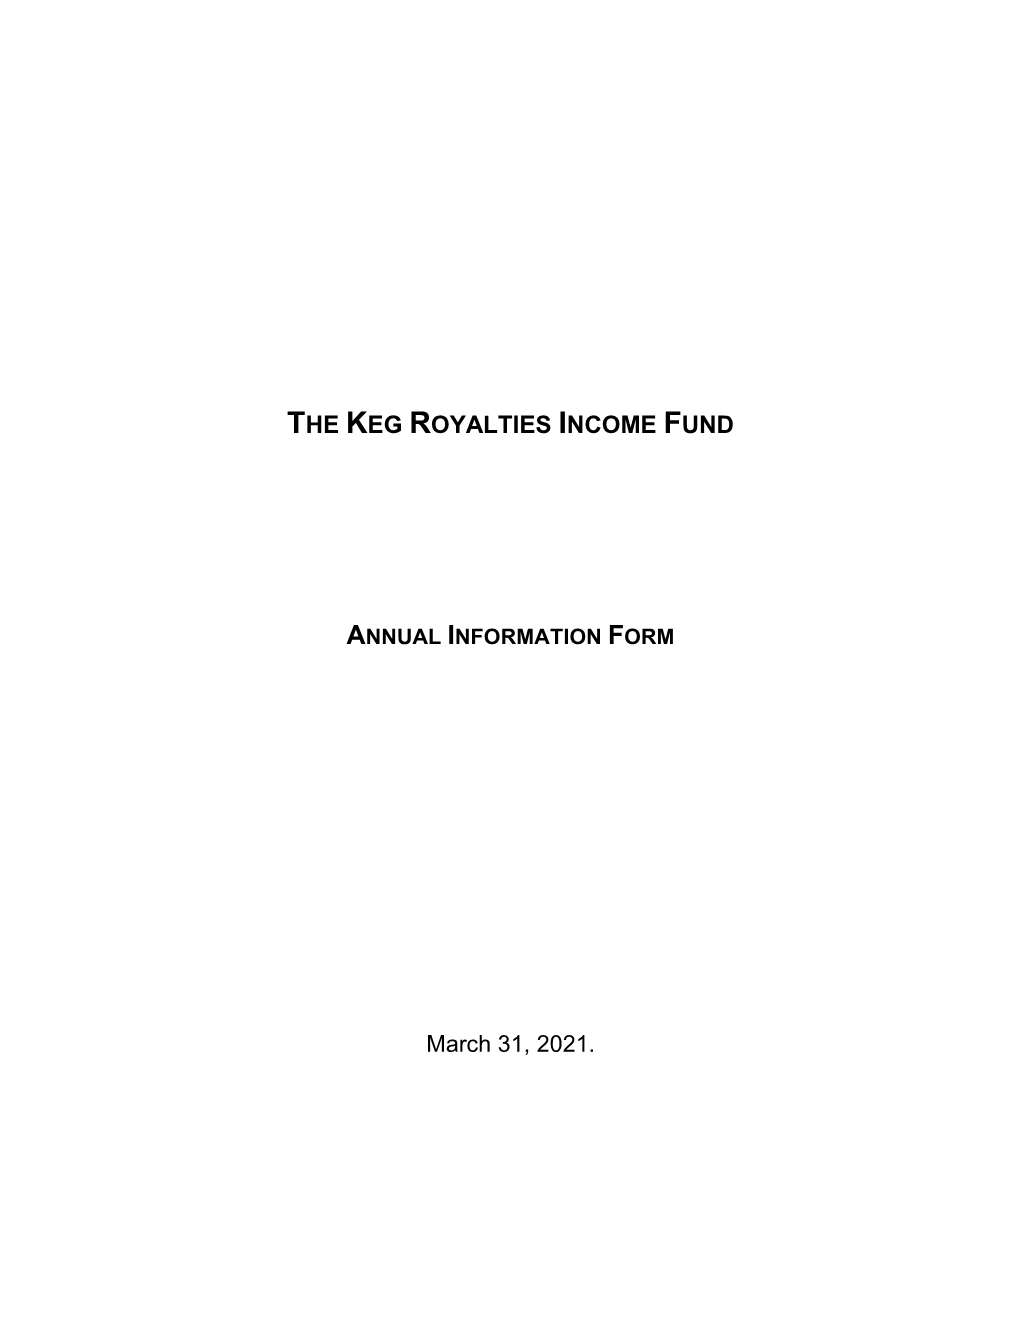 THE KEG ROYALTIES INCOME FUND March 31, 2021